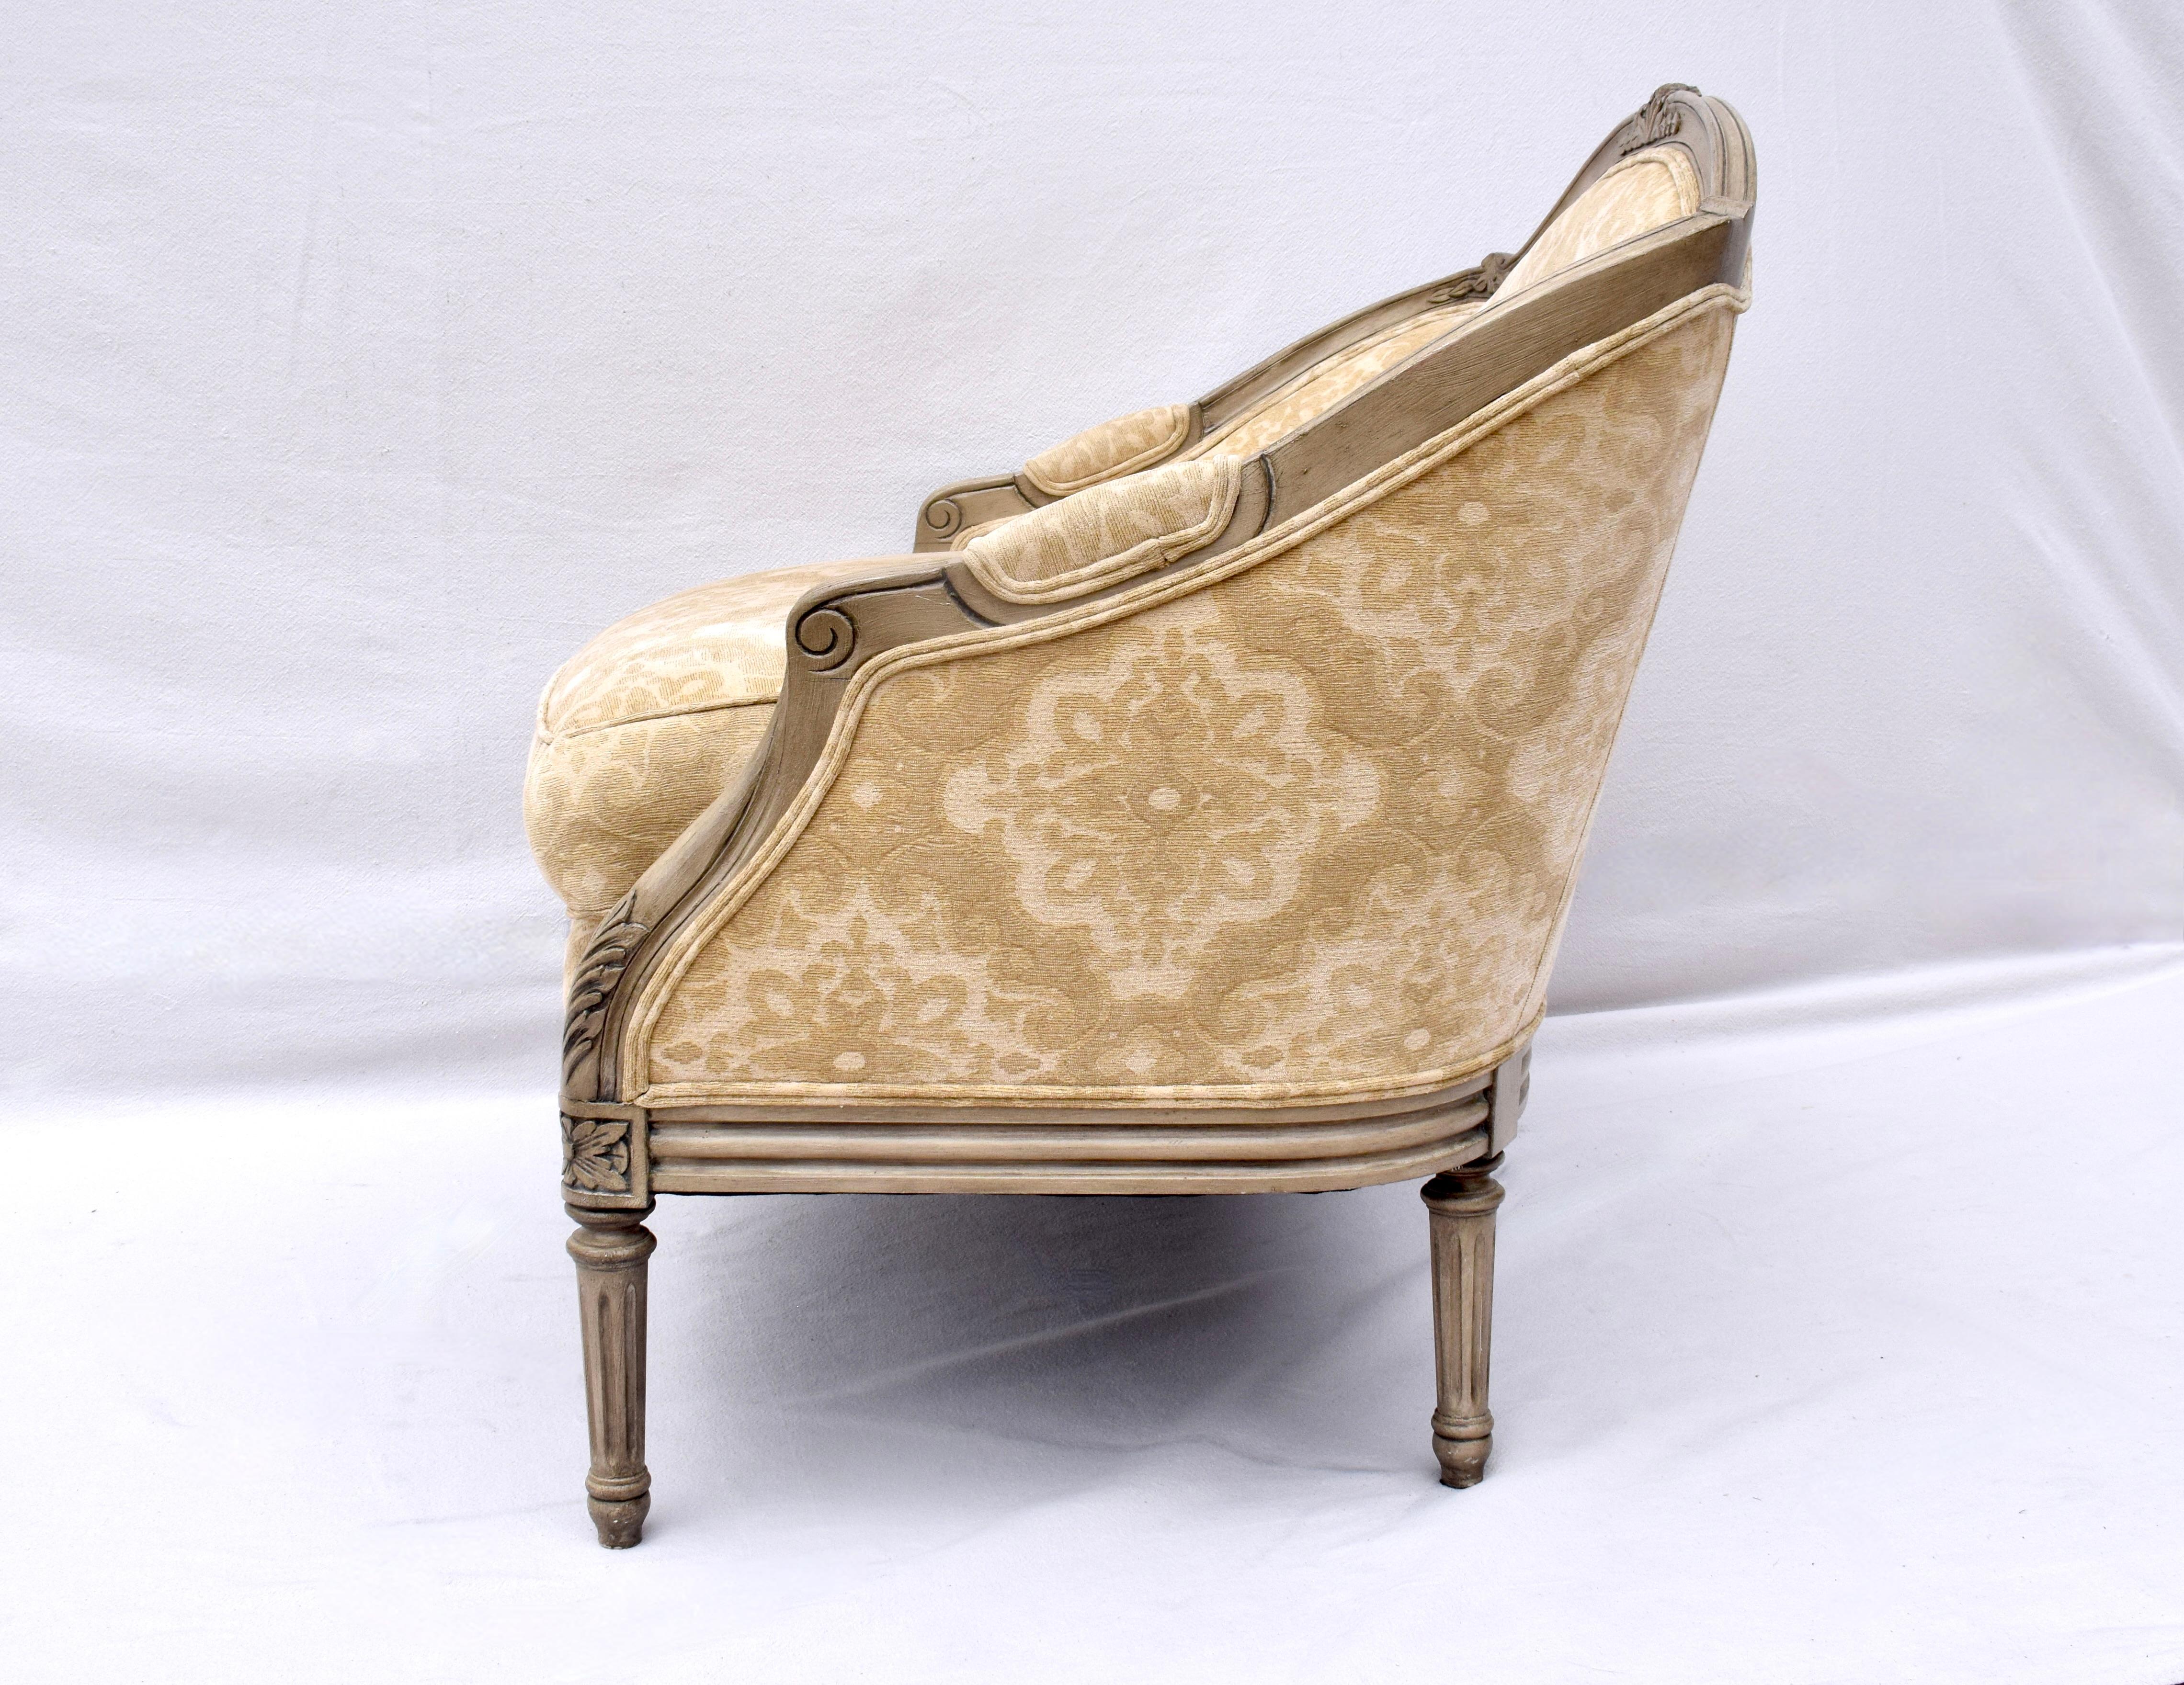 French Louis XvI Style Marquise Chair & Ottoman For Sale 2